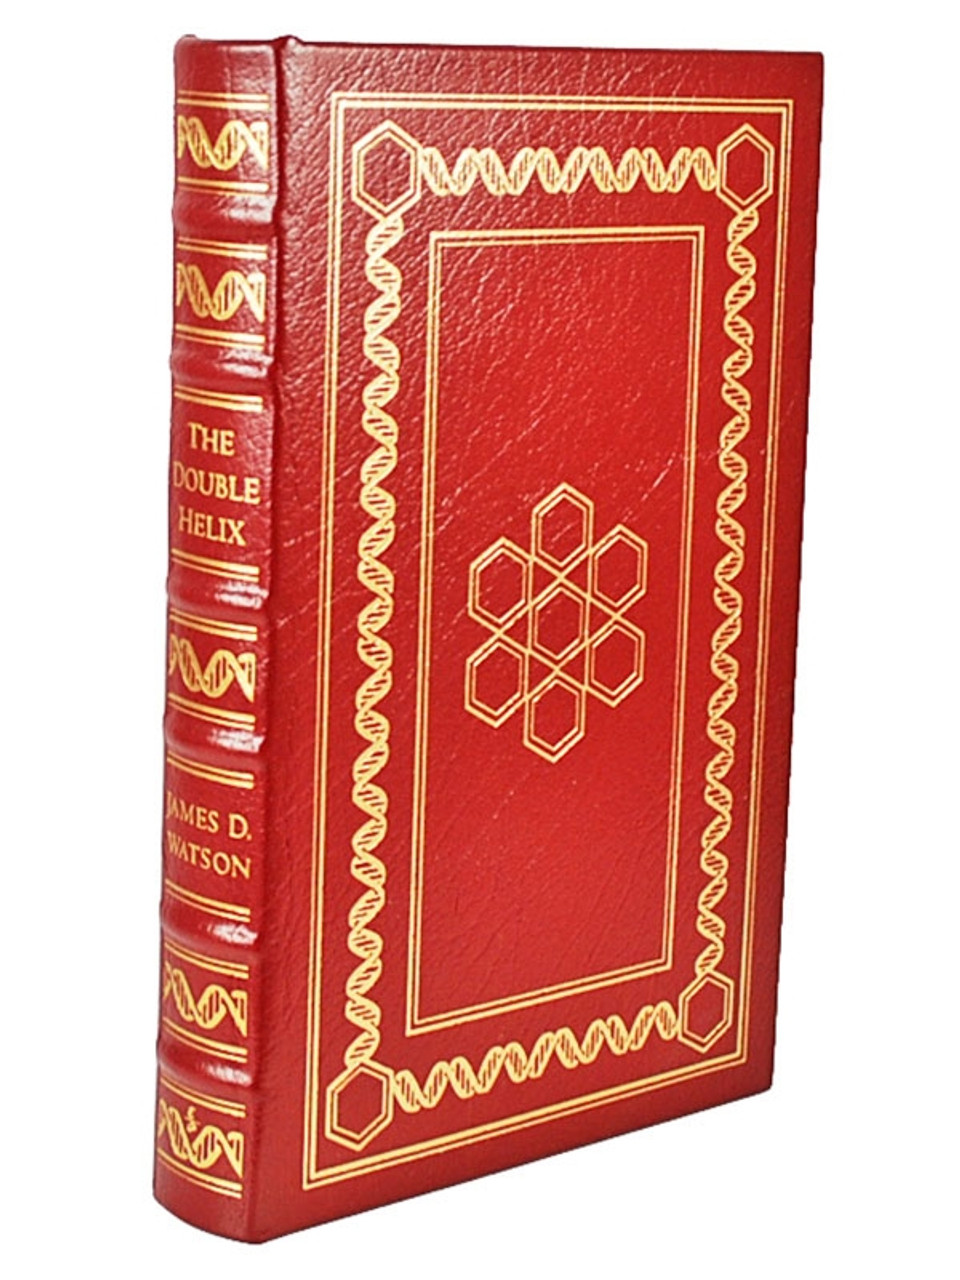 Easton Press, James A. Watson "The Double Helix" Leather Bound Collector's Edition [Sealed]